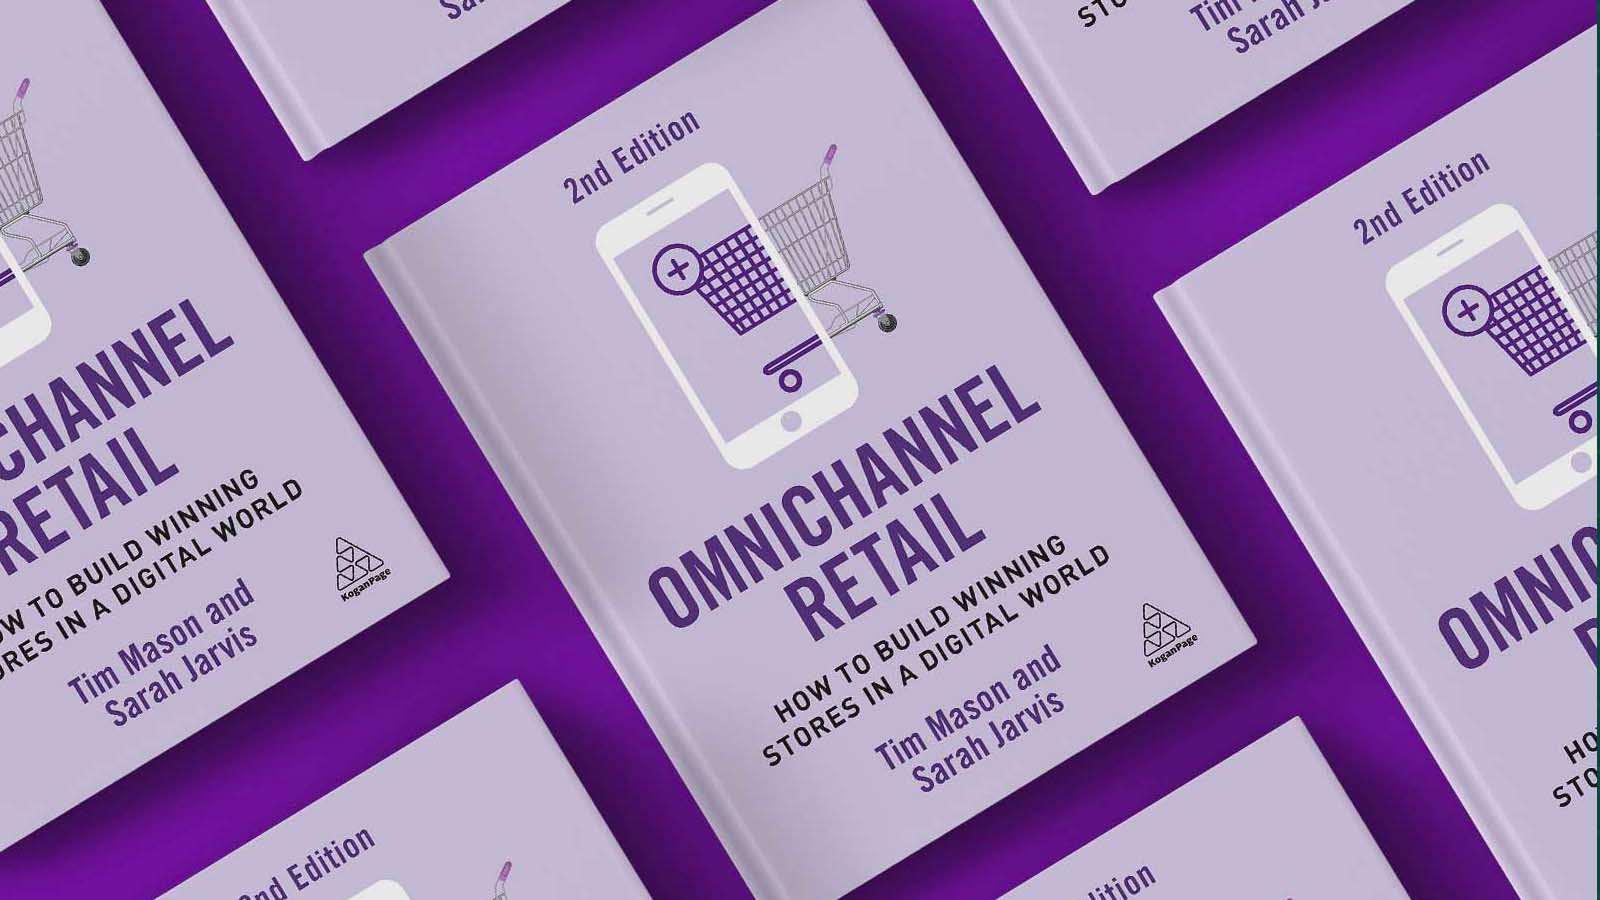 Omnichannel Retail book covers